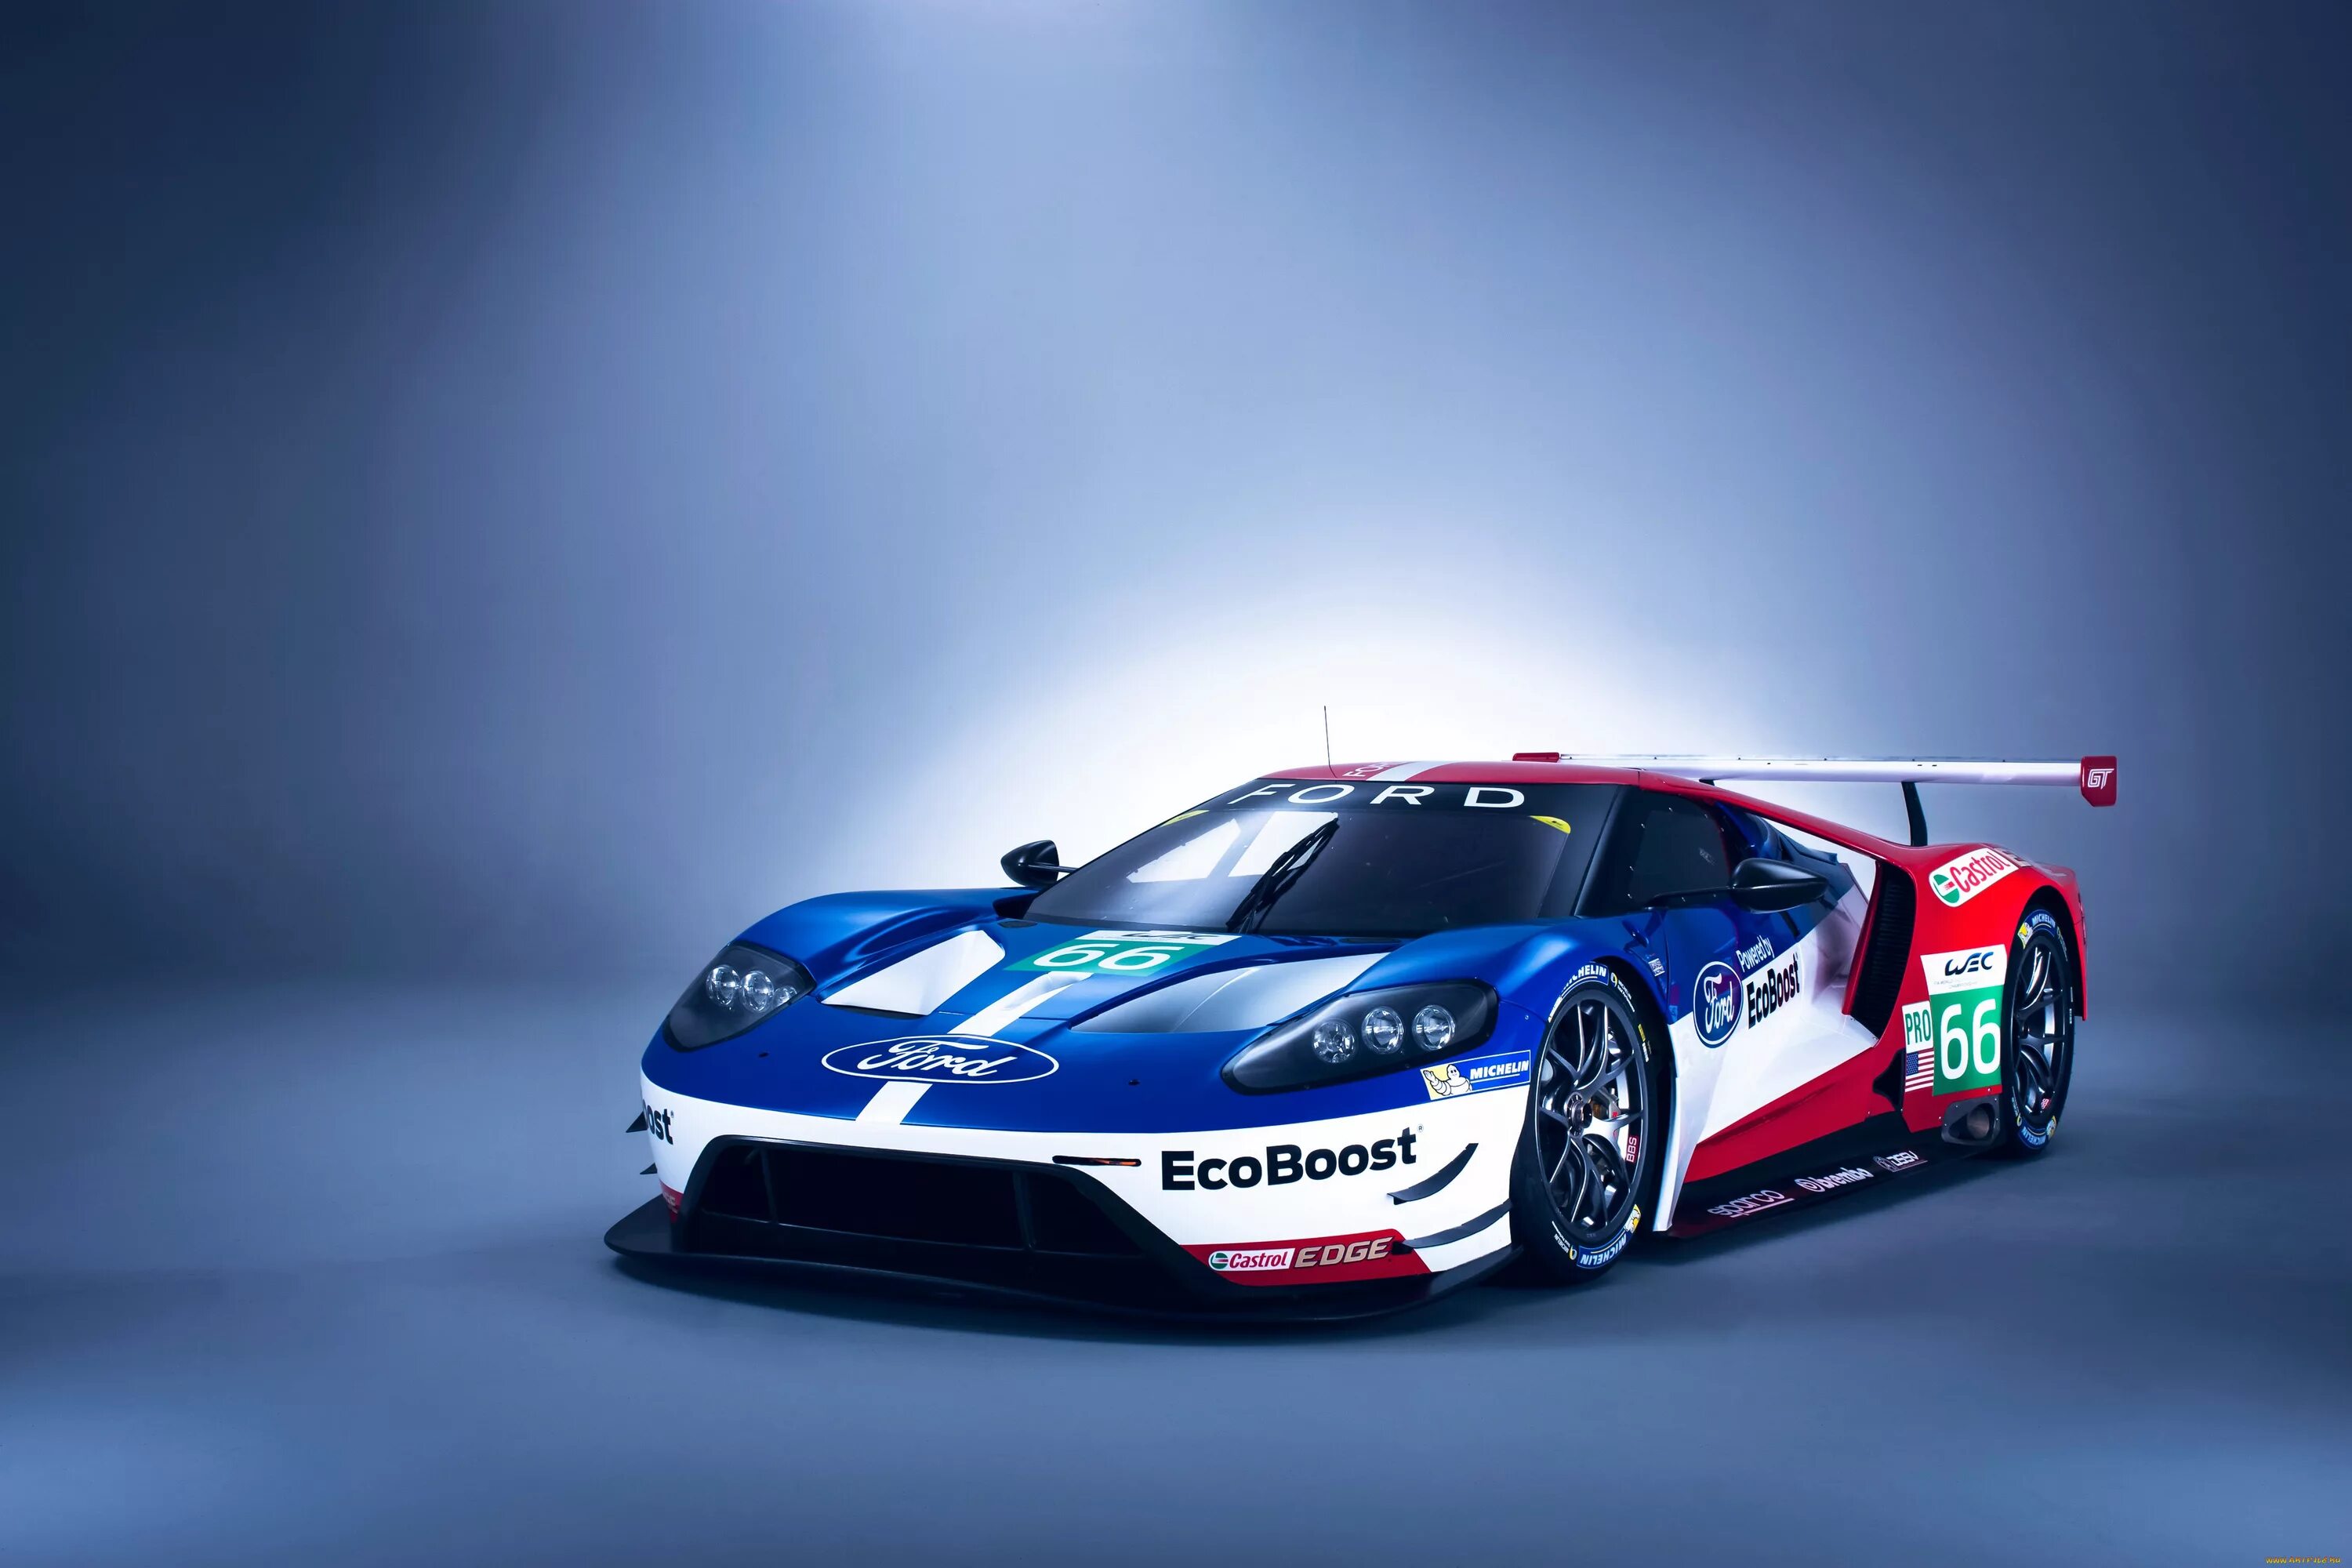 Кар б г. Ford gt 2016. 2016 Ford gt le mans. Форд ГТ гоночный. Ford gt Race.